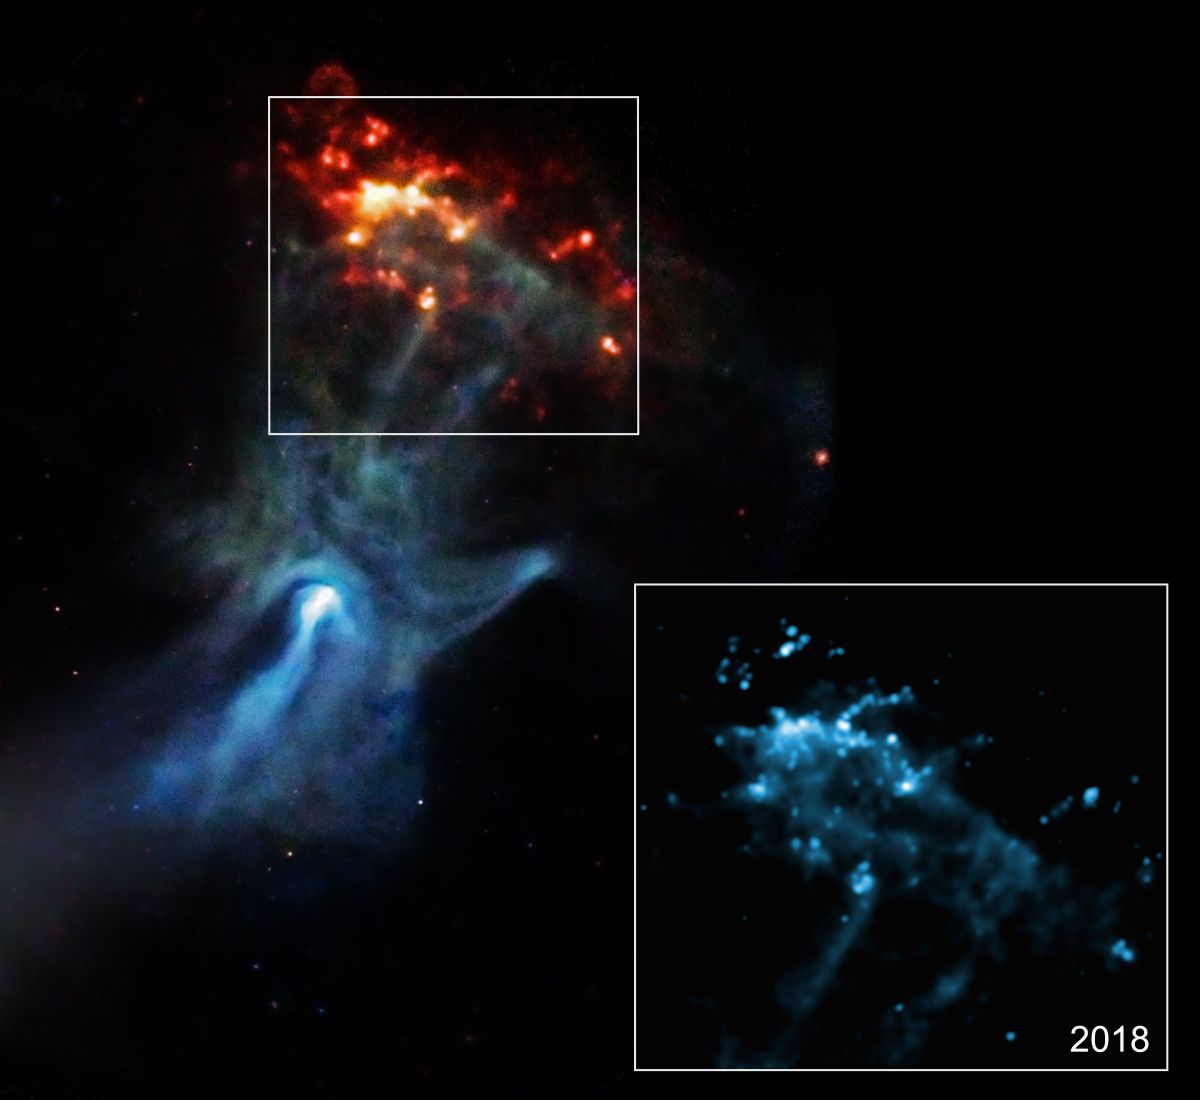 Giant ghostly 'hand' stretches through space in new X-ray views